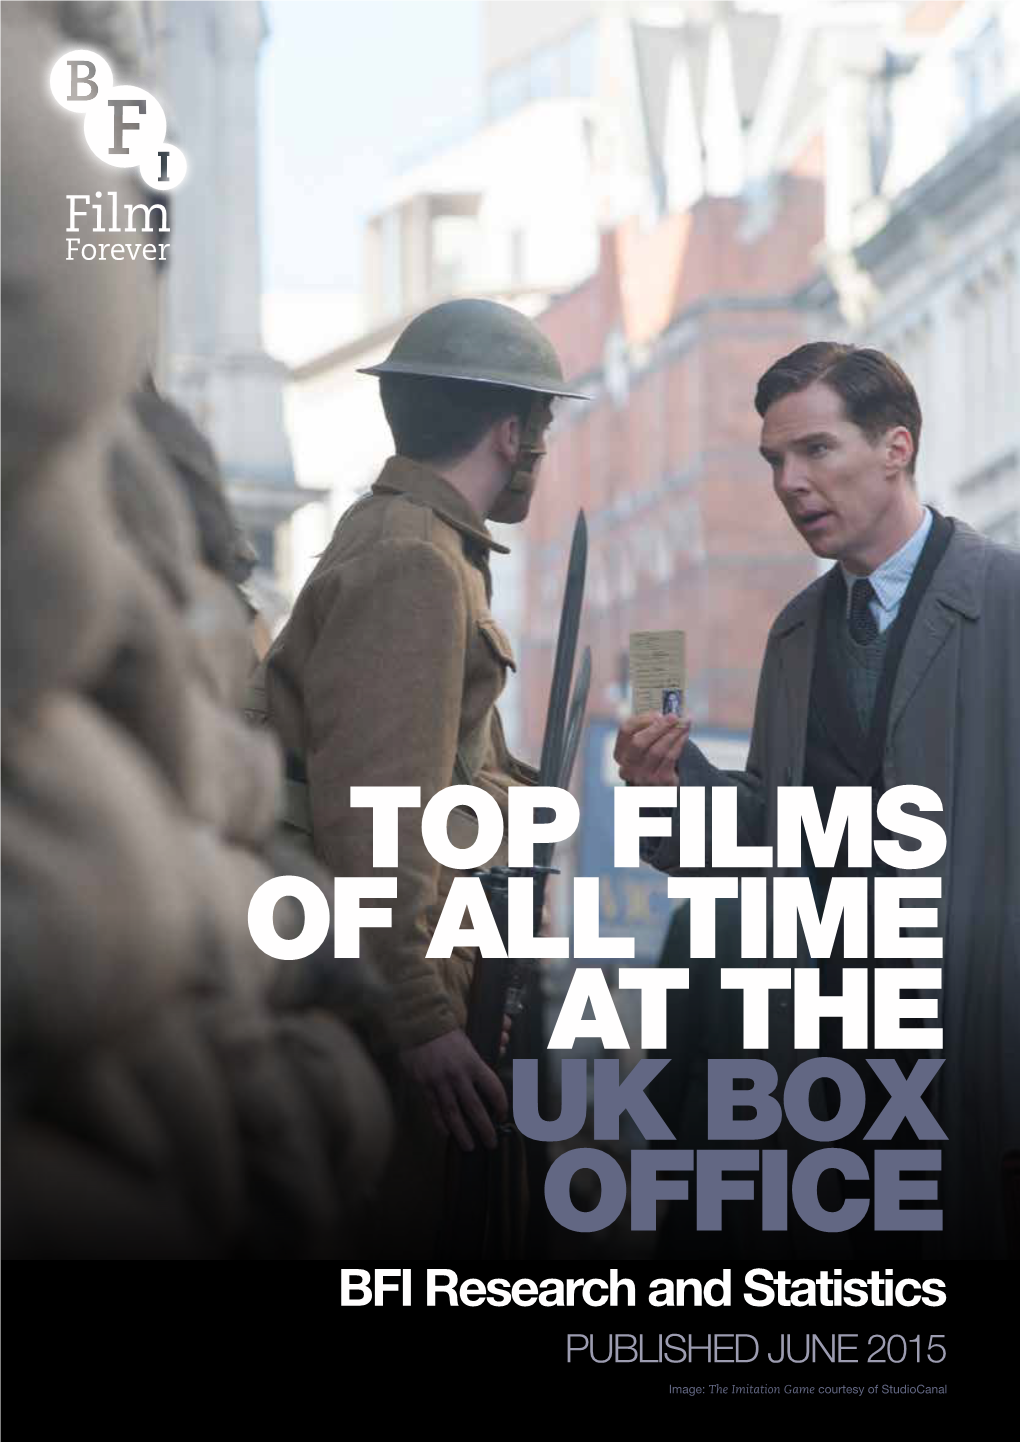 Top Films of All Time at the Uk Box Office